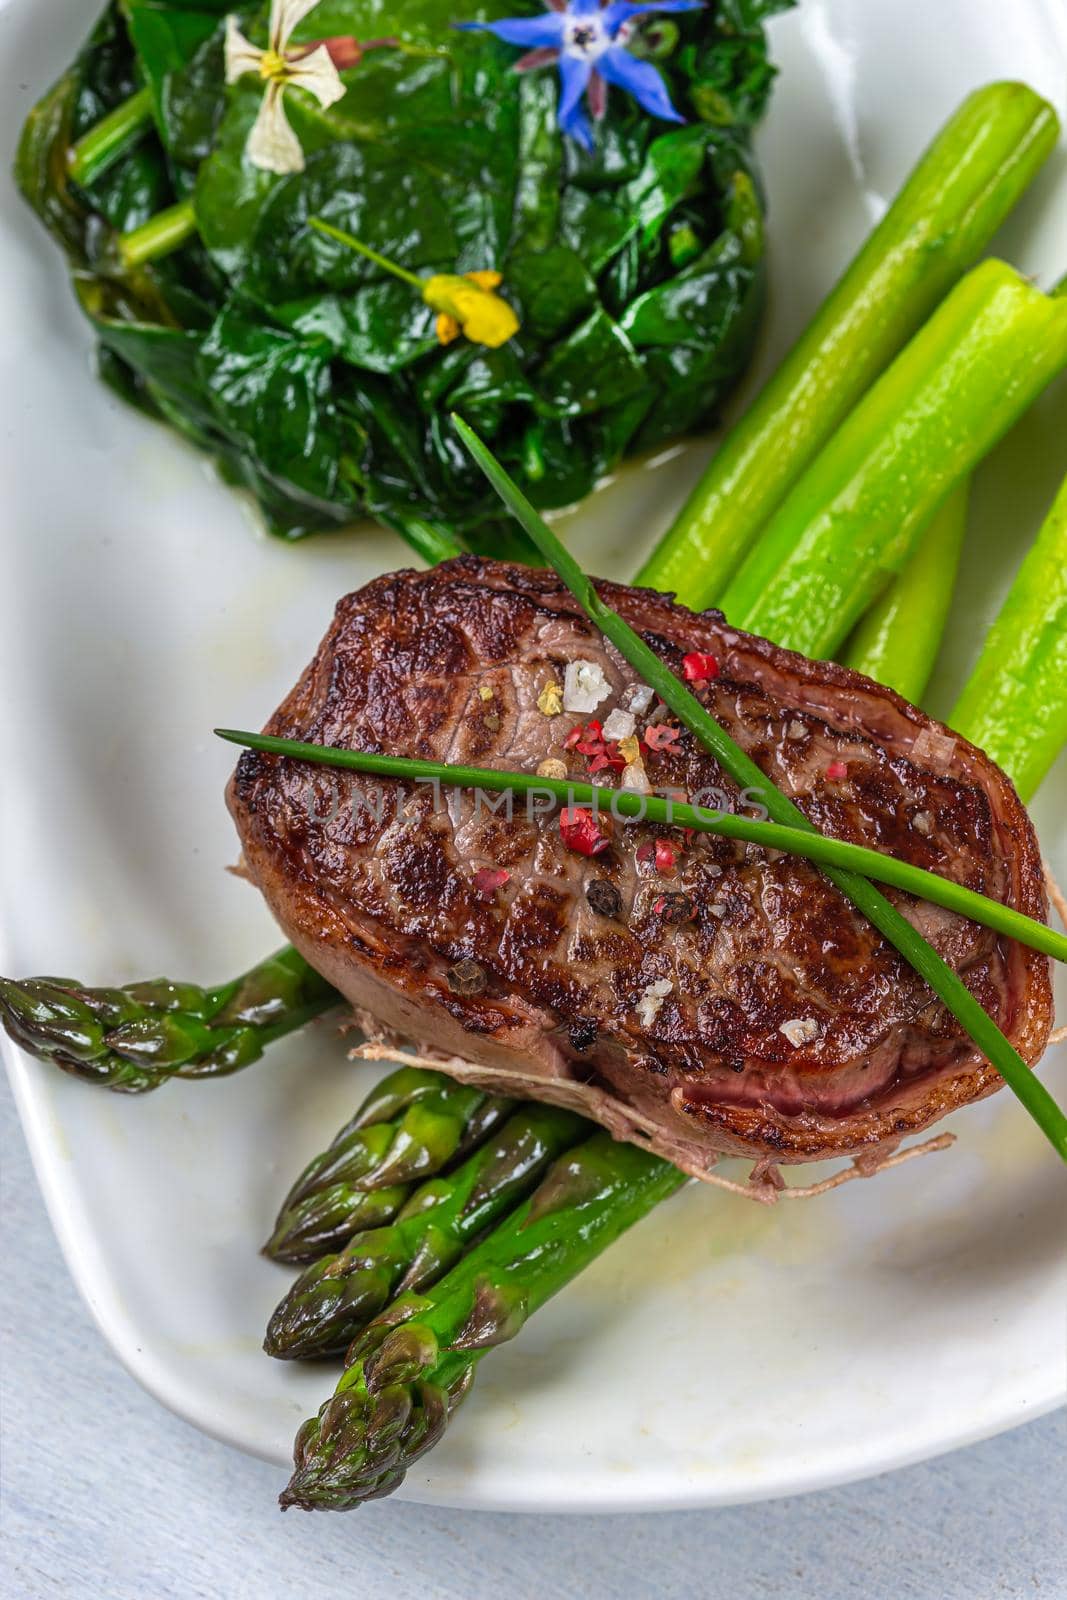 Top view of a grilled tournedos accompanied by spinach and asparagus.